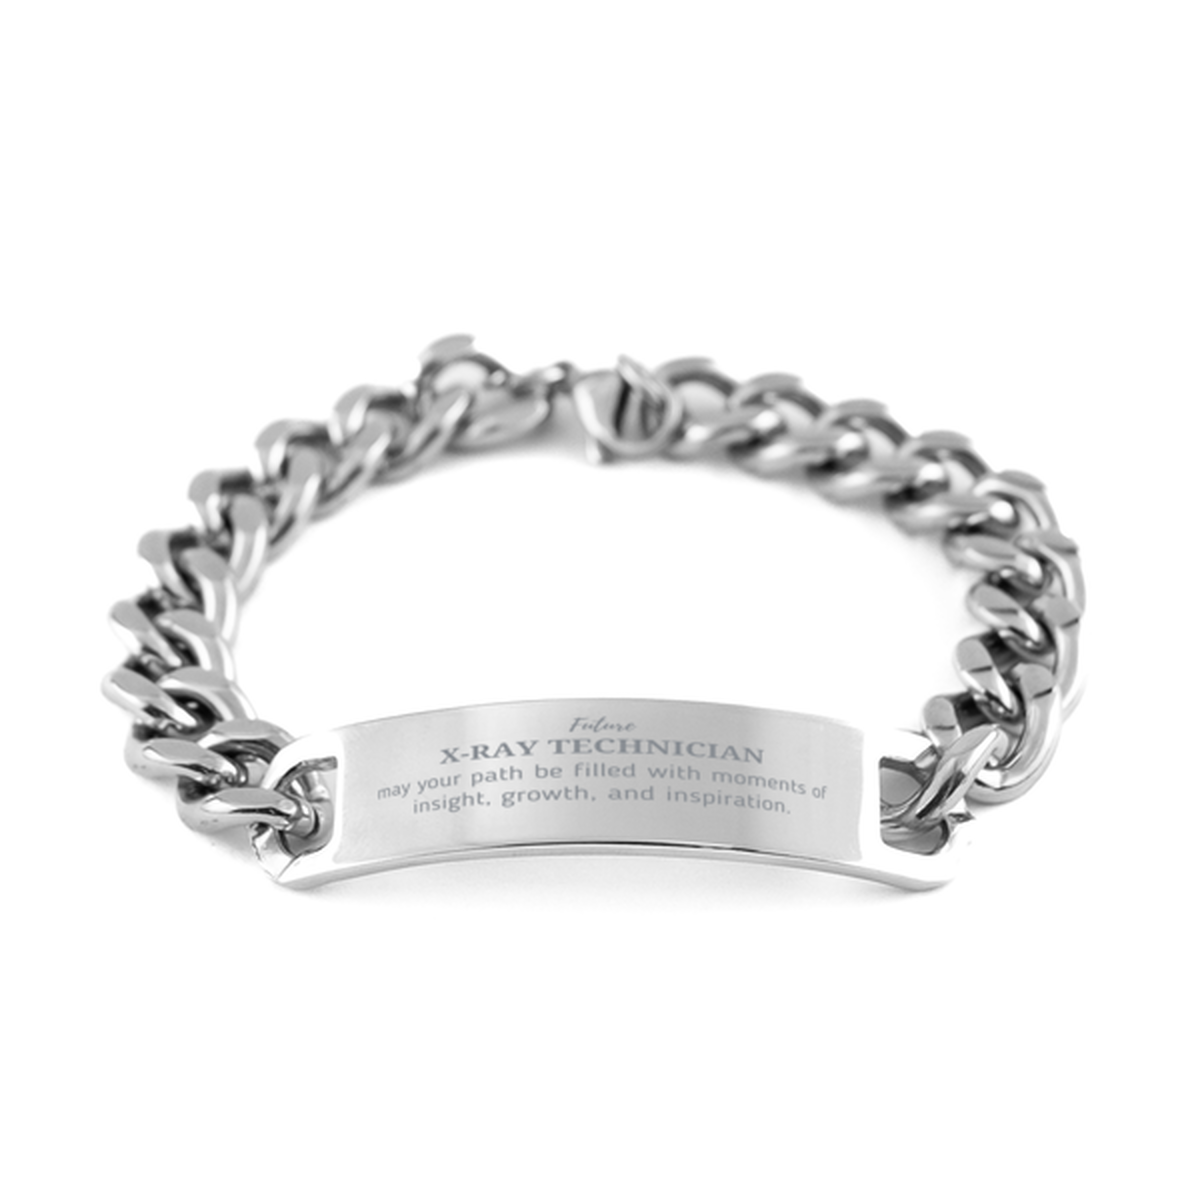 Future X-Ray Technician Gifts, May your path be filled with moments of insight, Graduation Gifts for New X-Ray Technician, Christmas Unique Cuban Chain Stainless Steel Bracelet For Men, Women, Friends